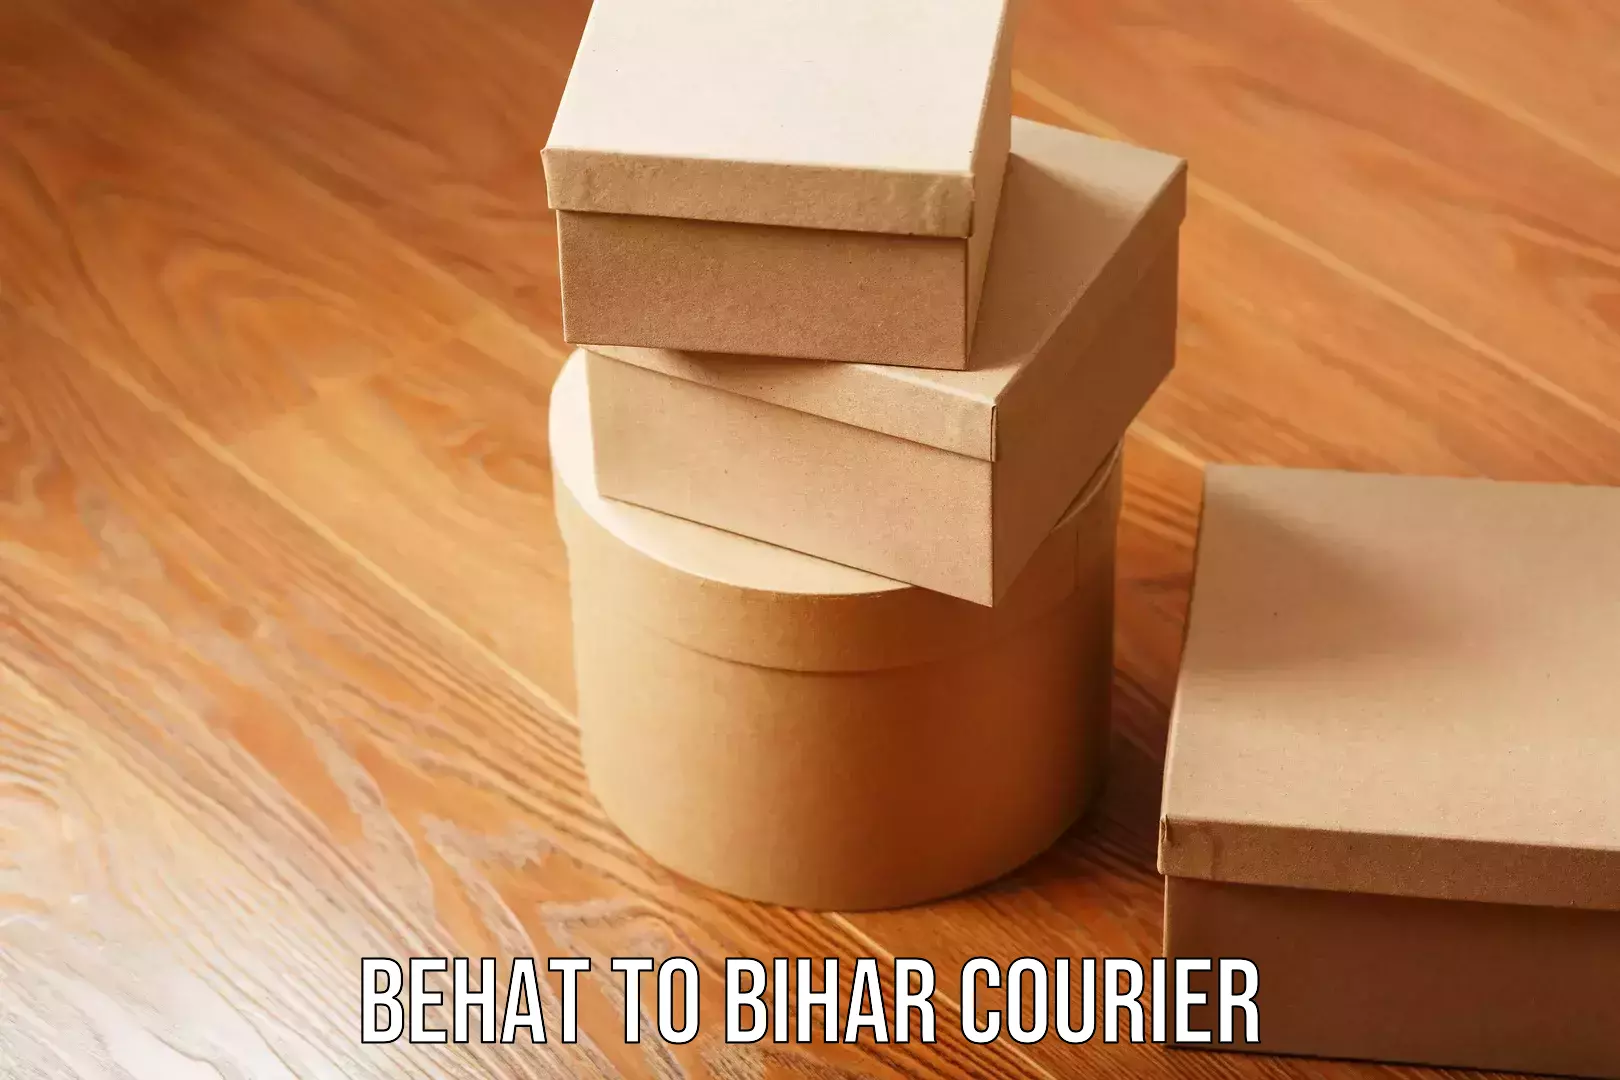 Reliable courier service Behat to Bihar